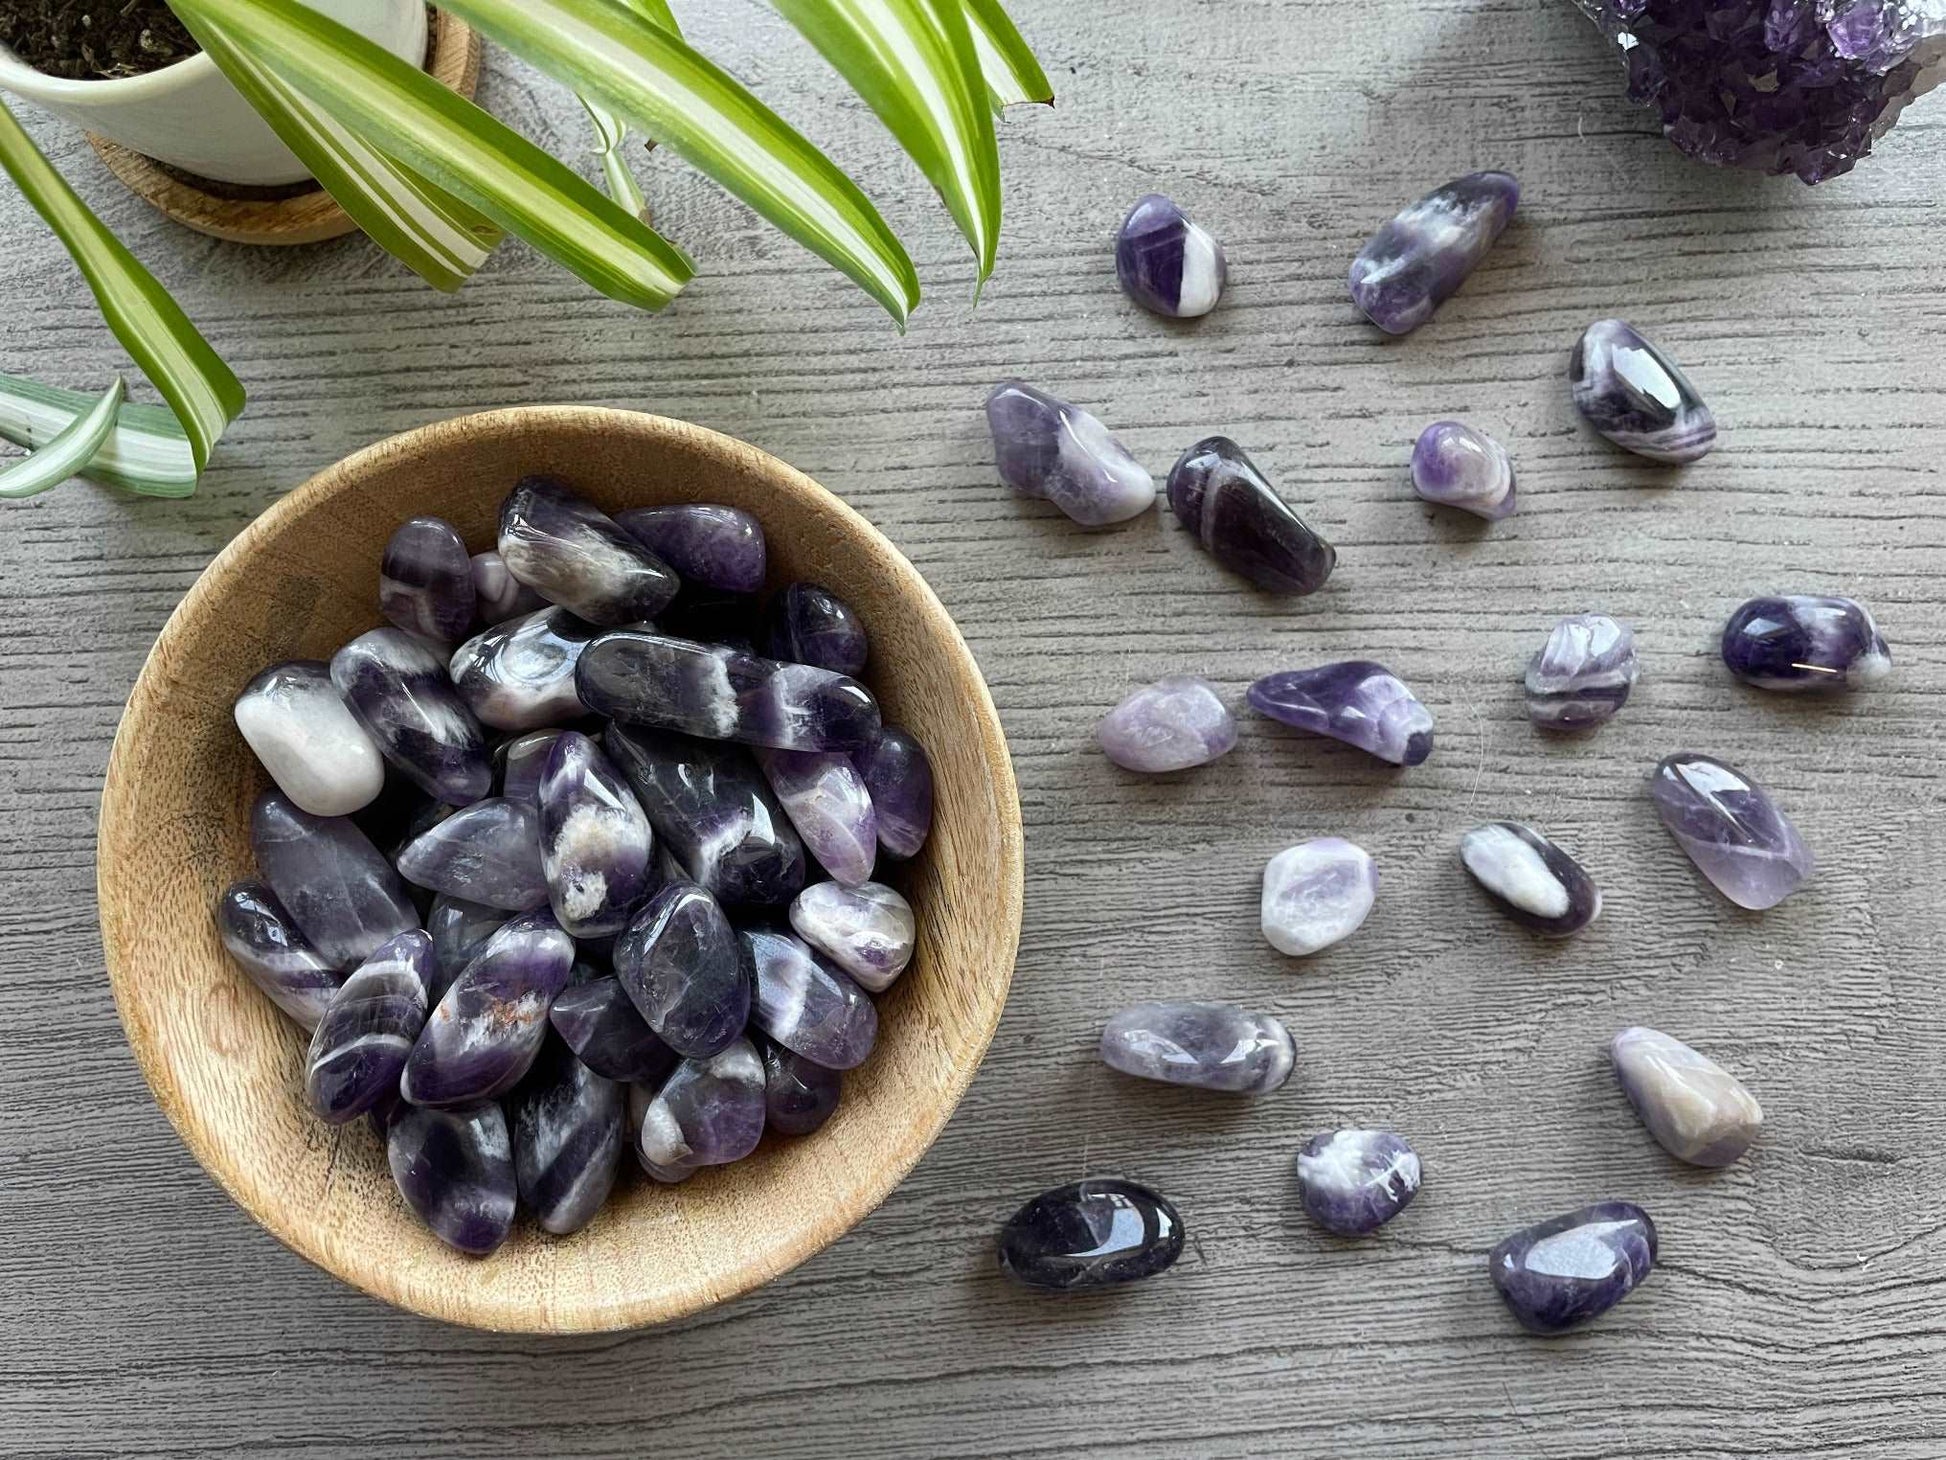 Pictured are various chevron amethyst tumbled stones.